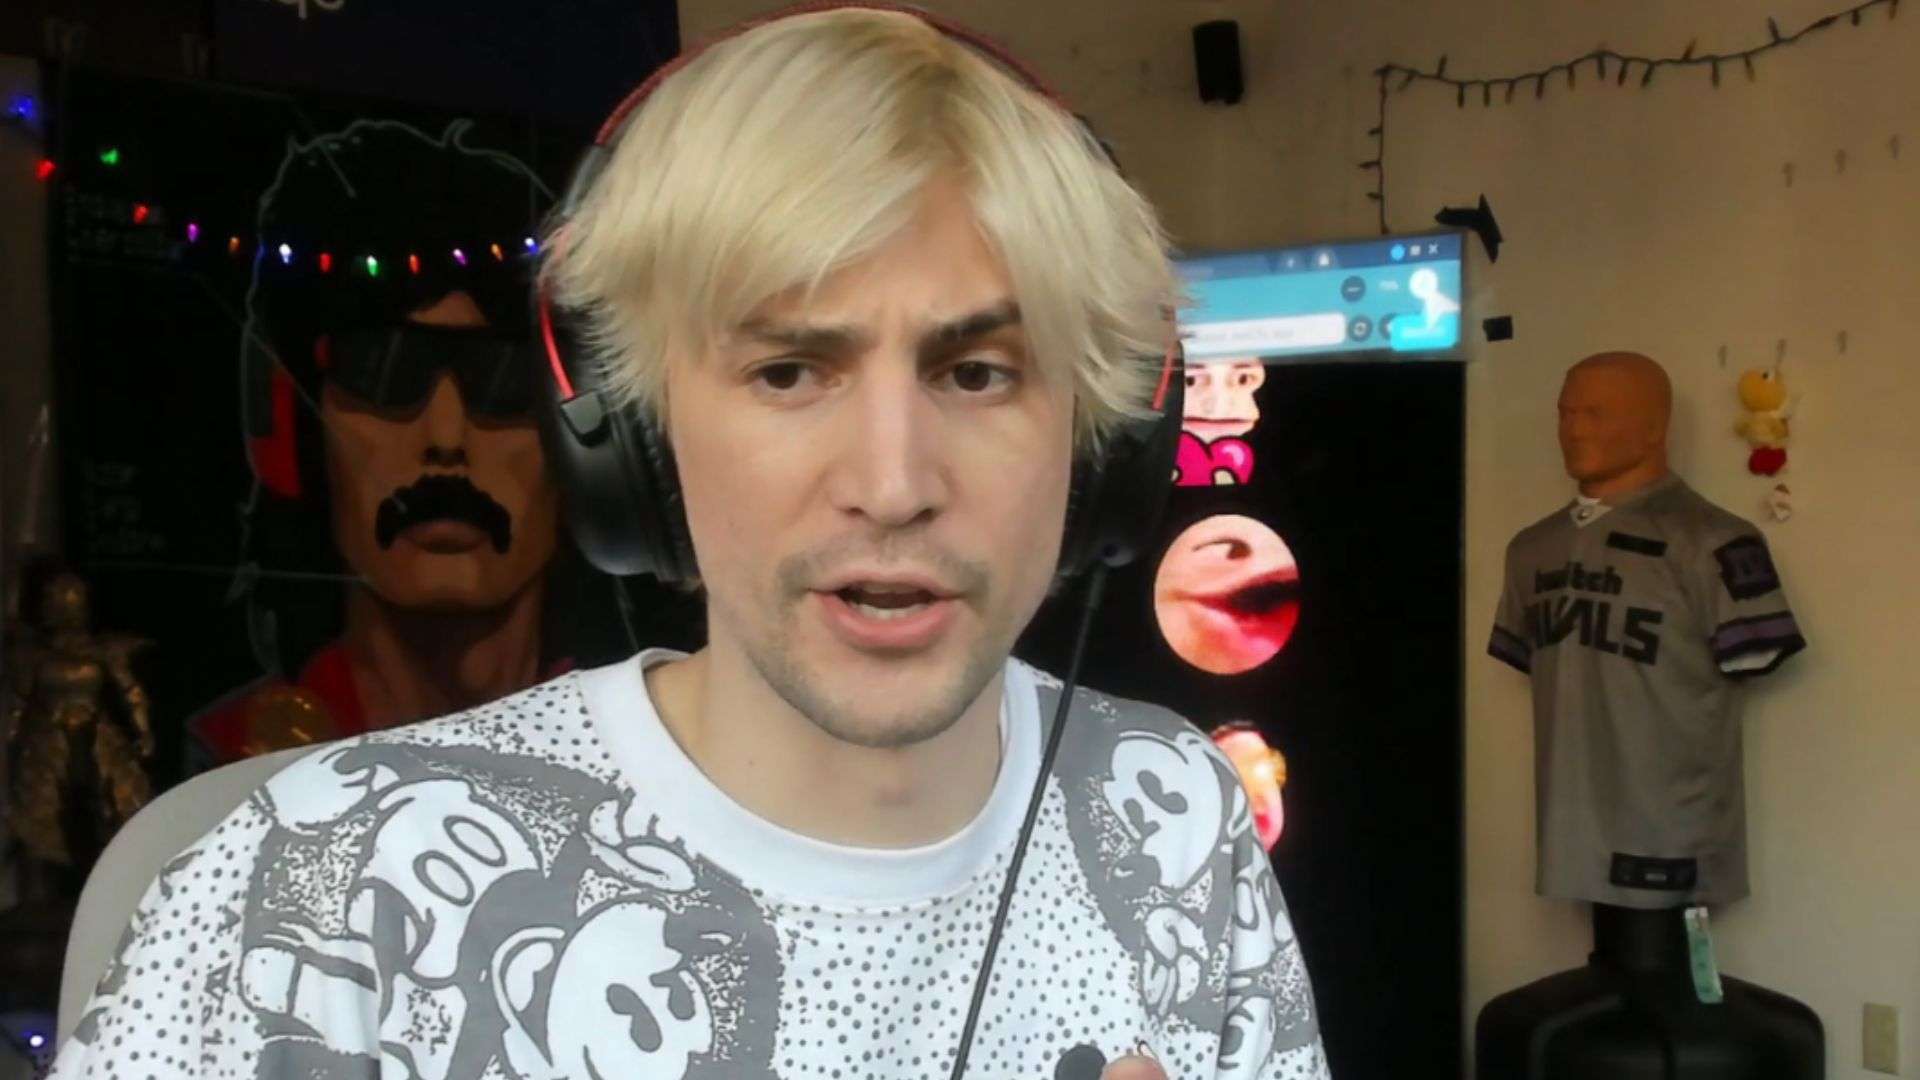 xQc in twitch and grey shirt looking at camera